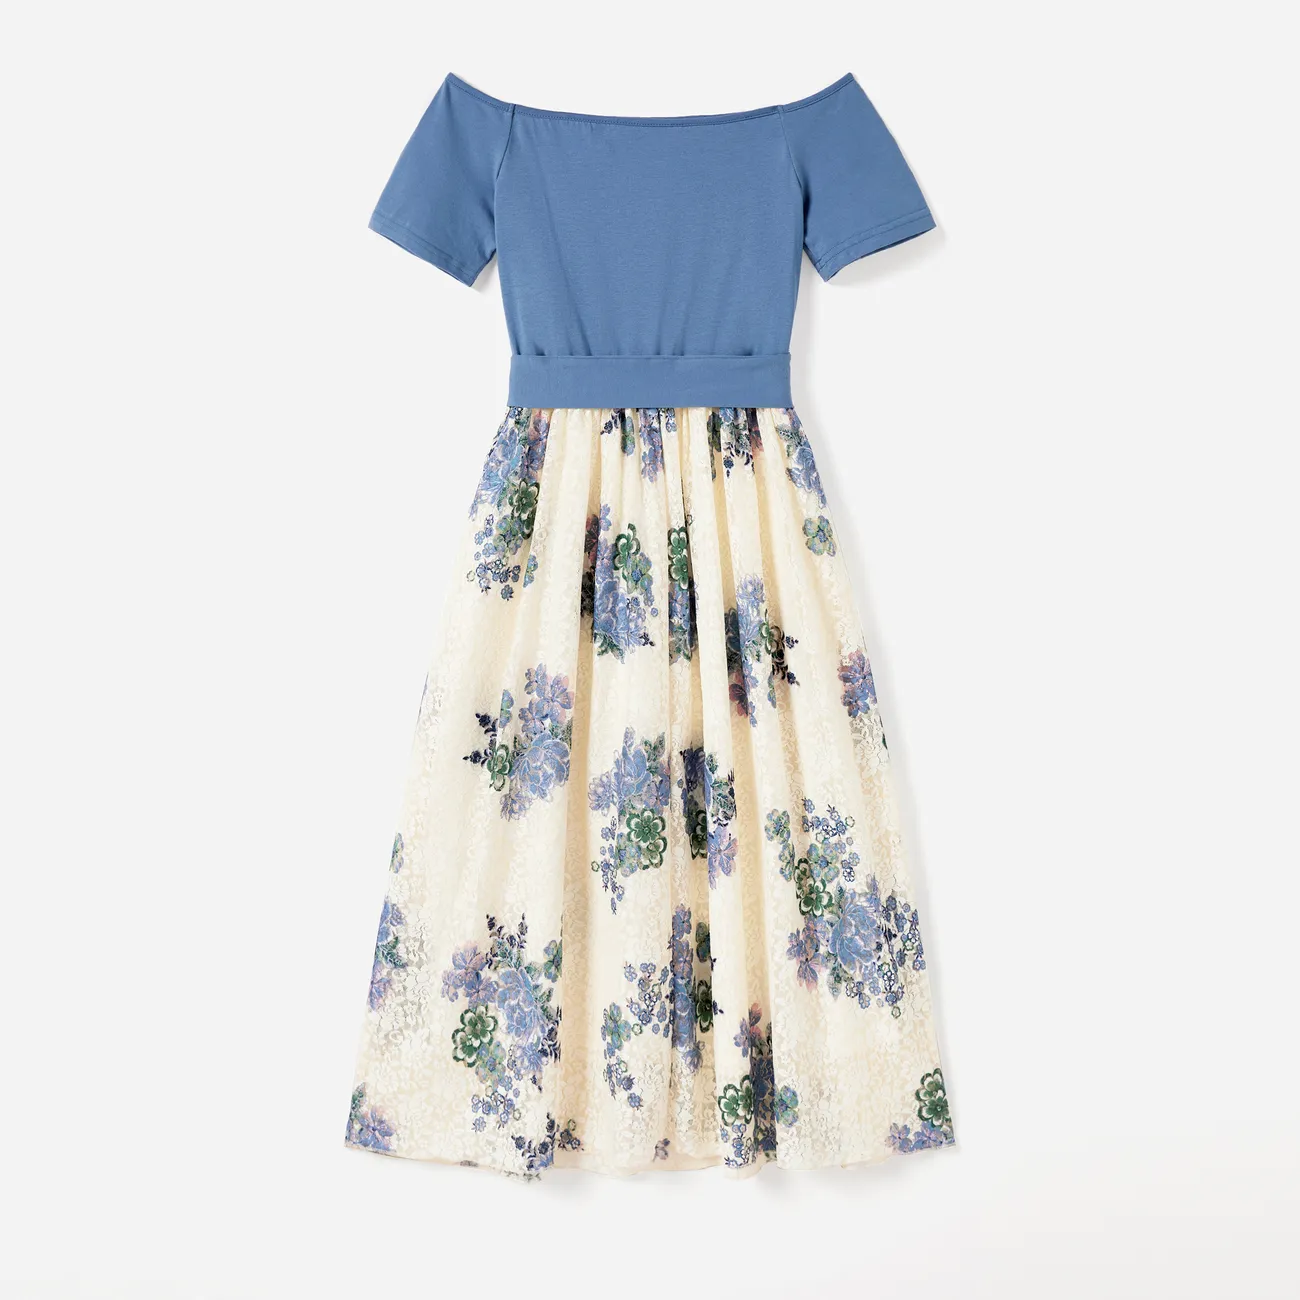 Family Matching Panel Stripe Tee and Open Shoulder Floral Lace Bottom Dress Sets Blue big image 1